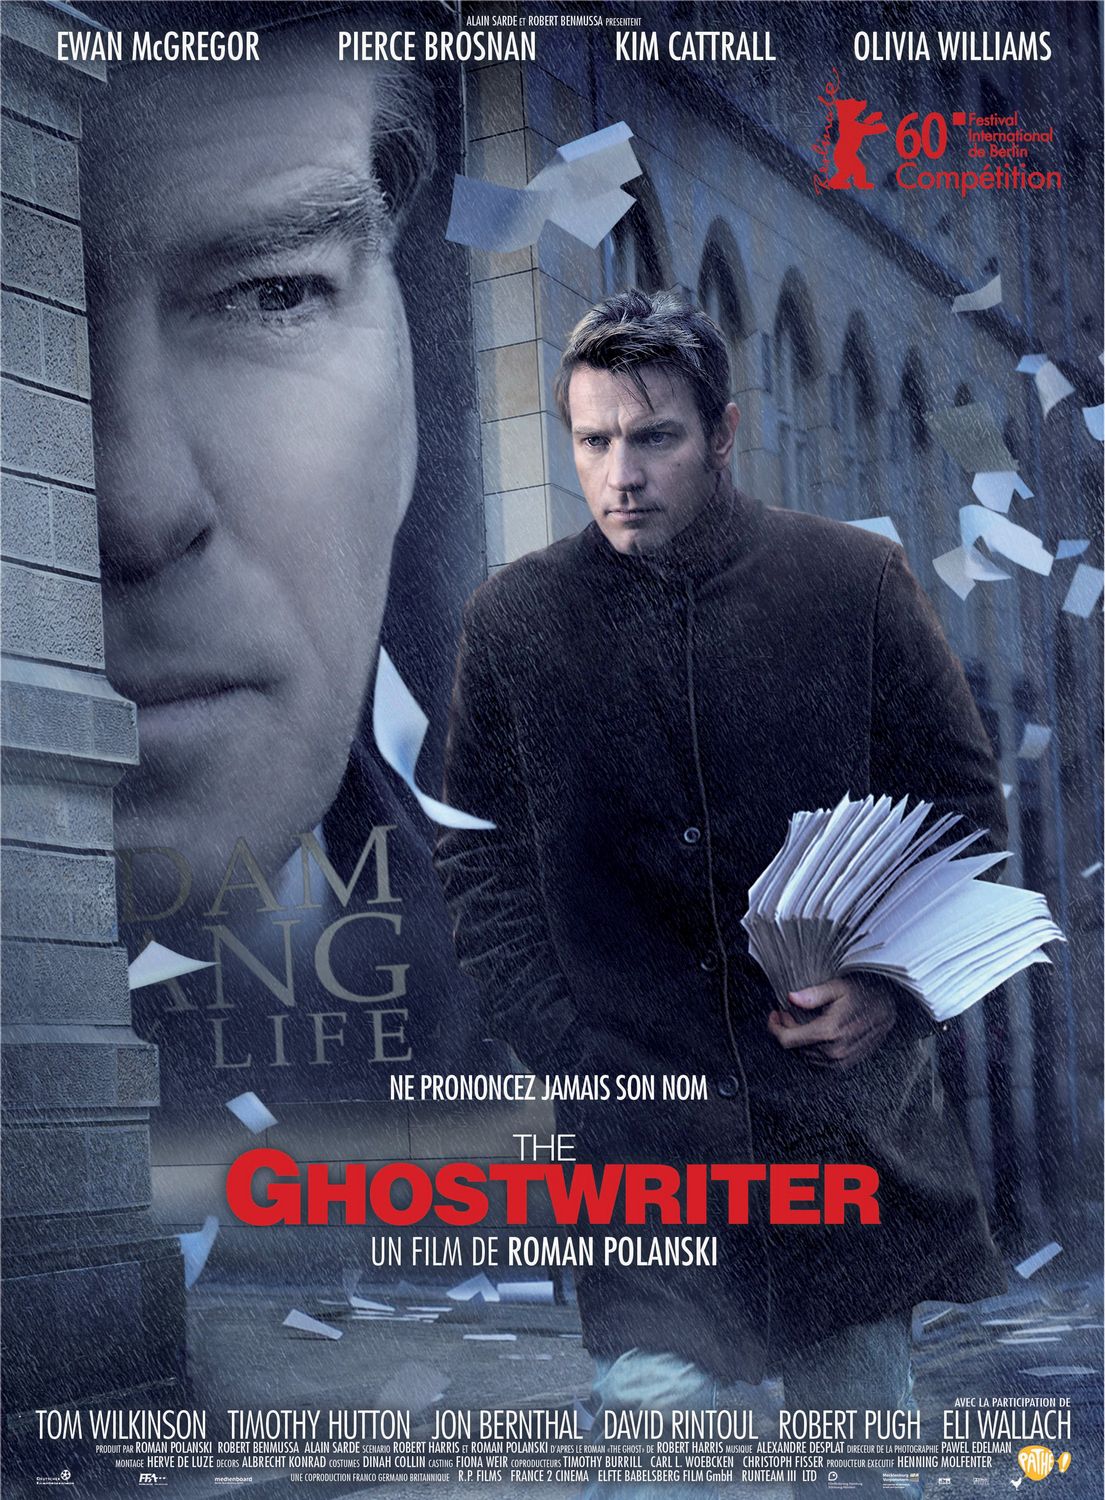 http://s6.picofile.com/file/8209305084/ghost_writer_xlg.jpg